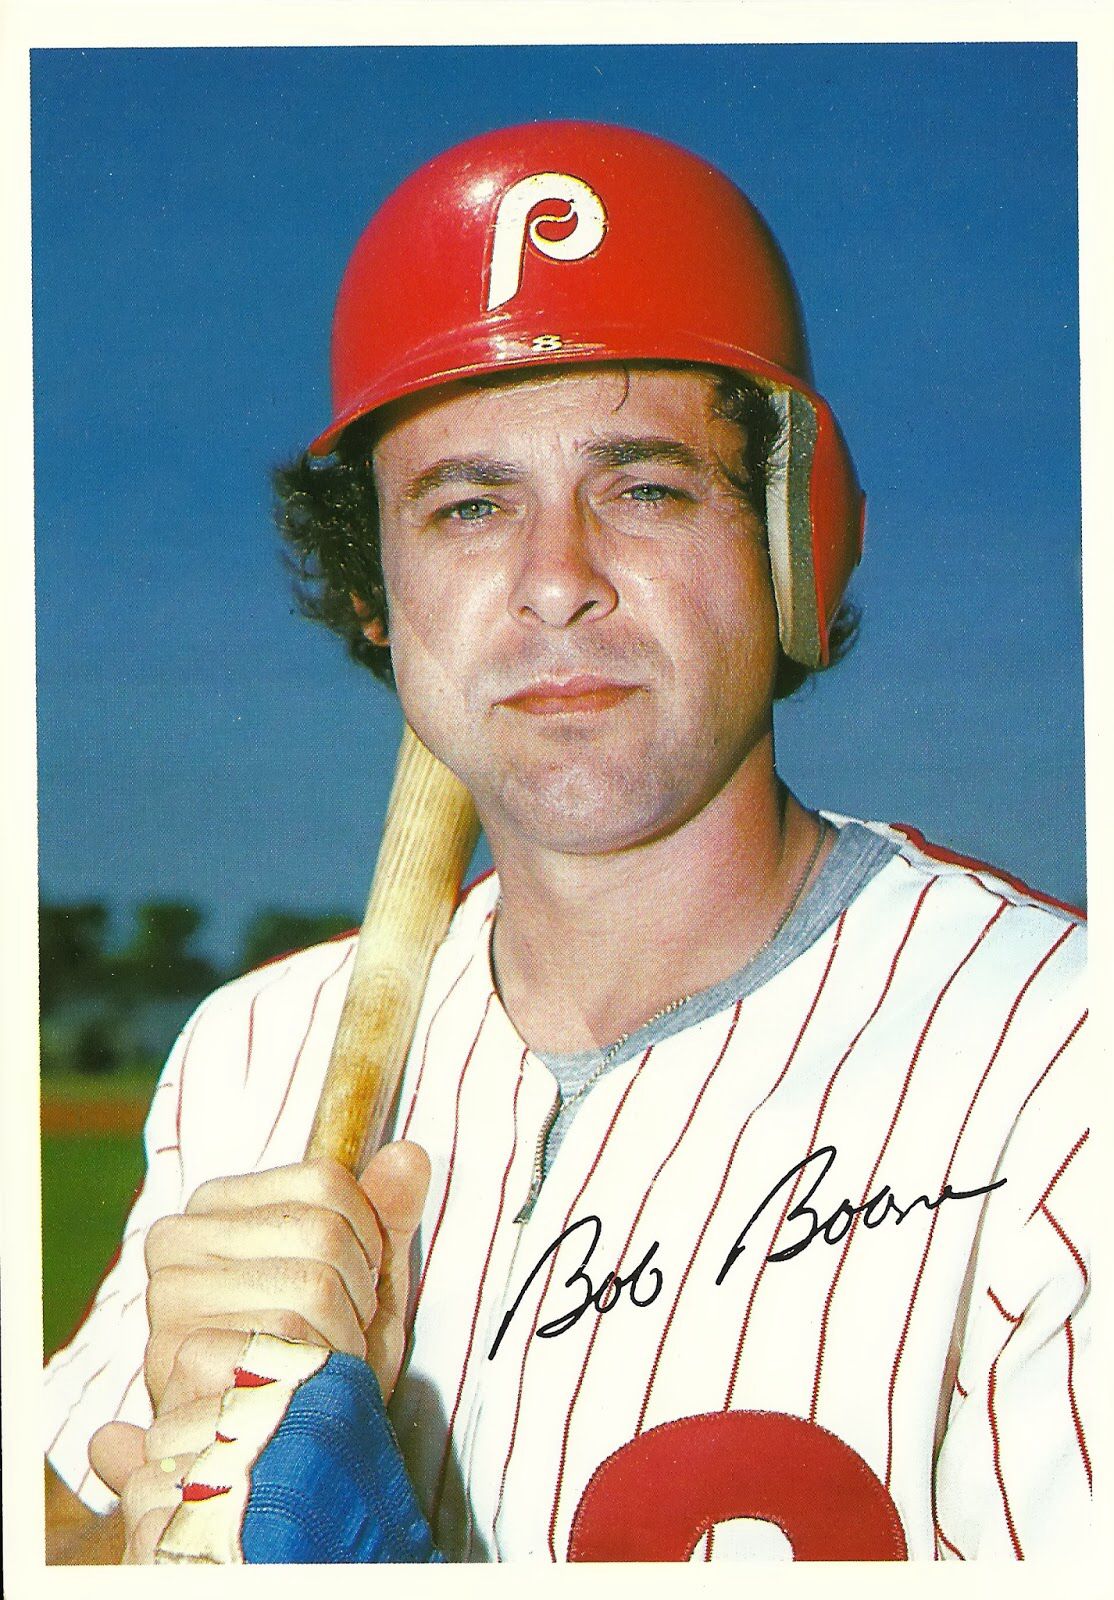 Aaron Boone's Father Bob Boone During His Playing Career